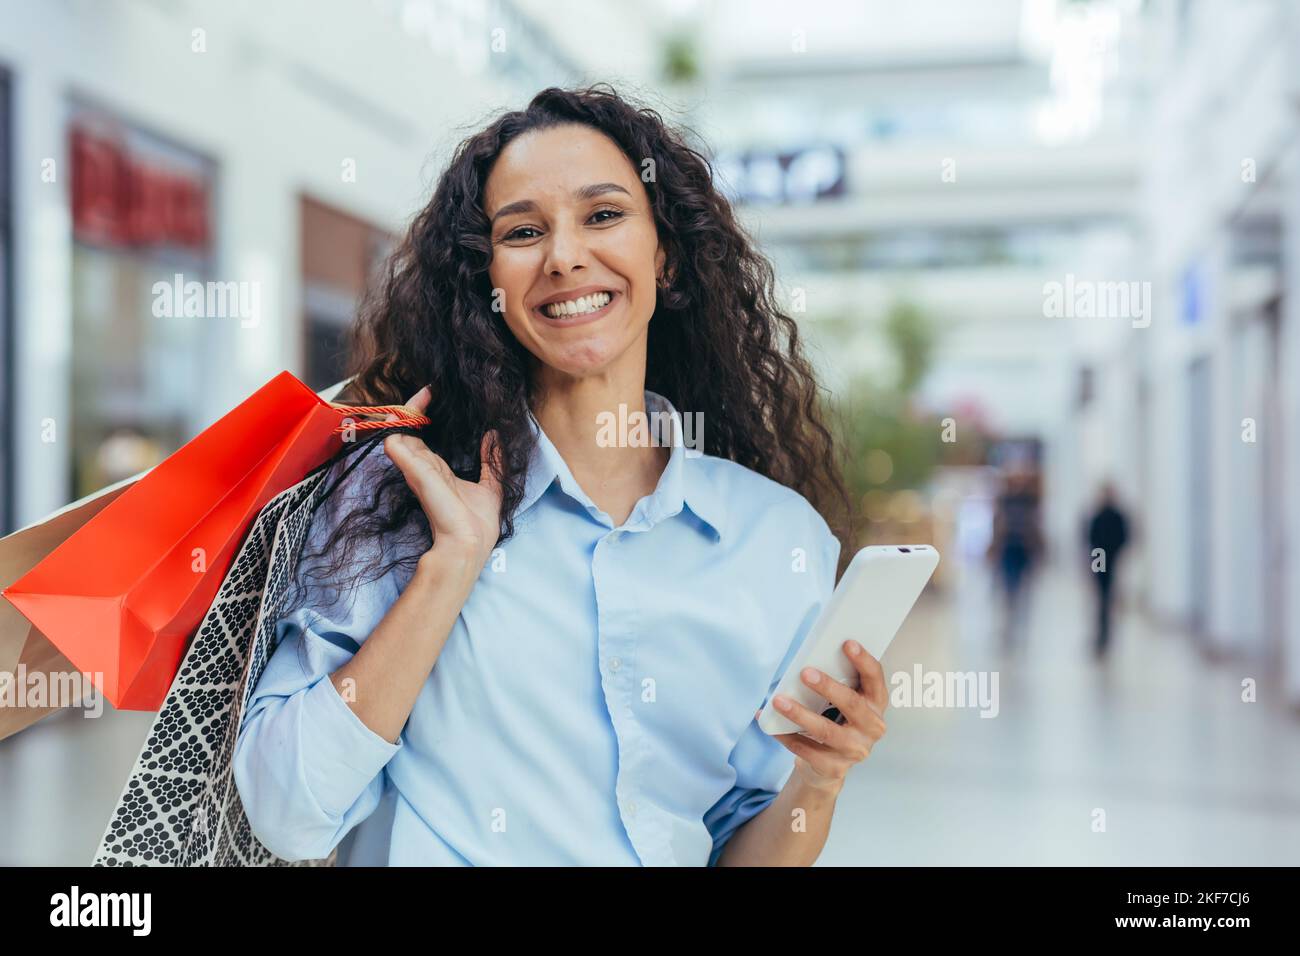 Portrait of happy hispanic woman shopper in store, looking at camera and smiling holding colorful shopping bags and gifts. Stock Photo